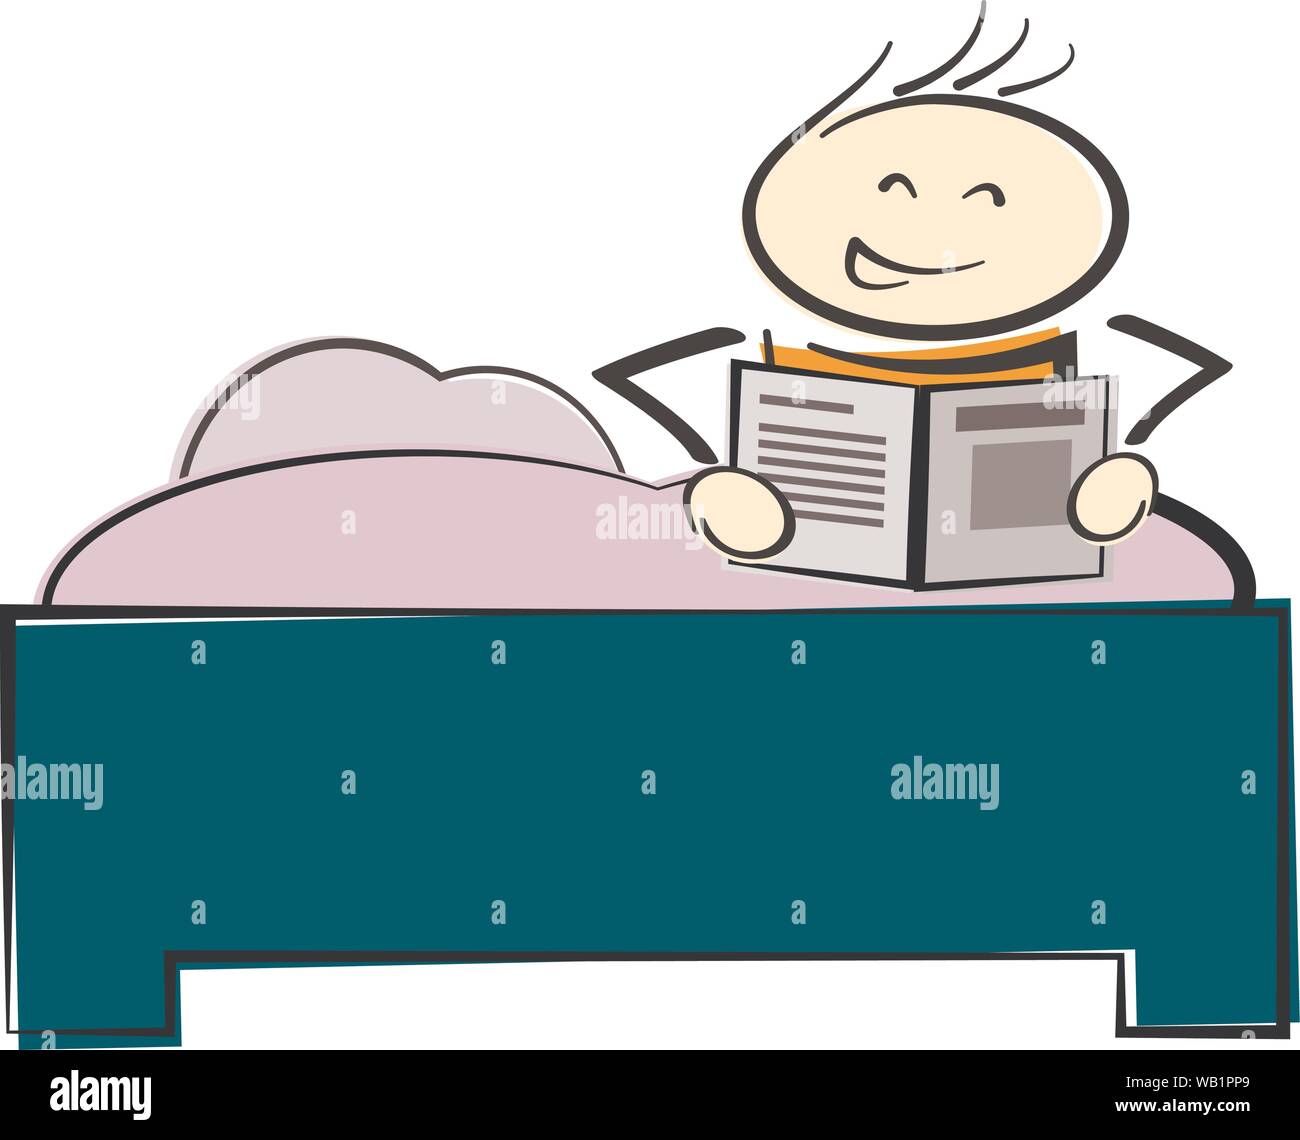 stickman character sitting in bed reading a book or newspaper vector illustration Stock Vector